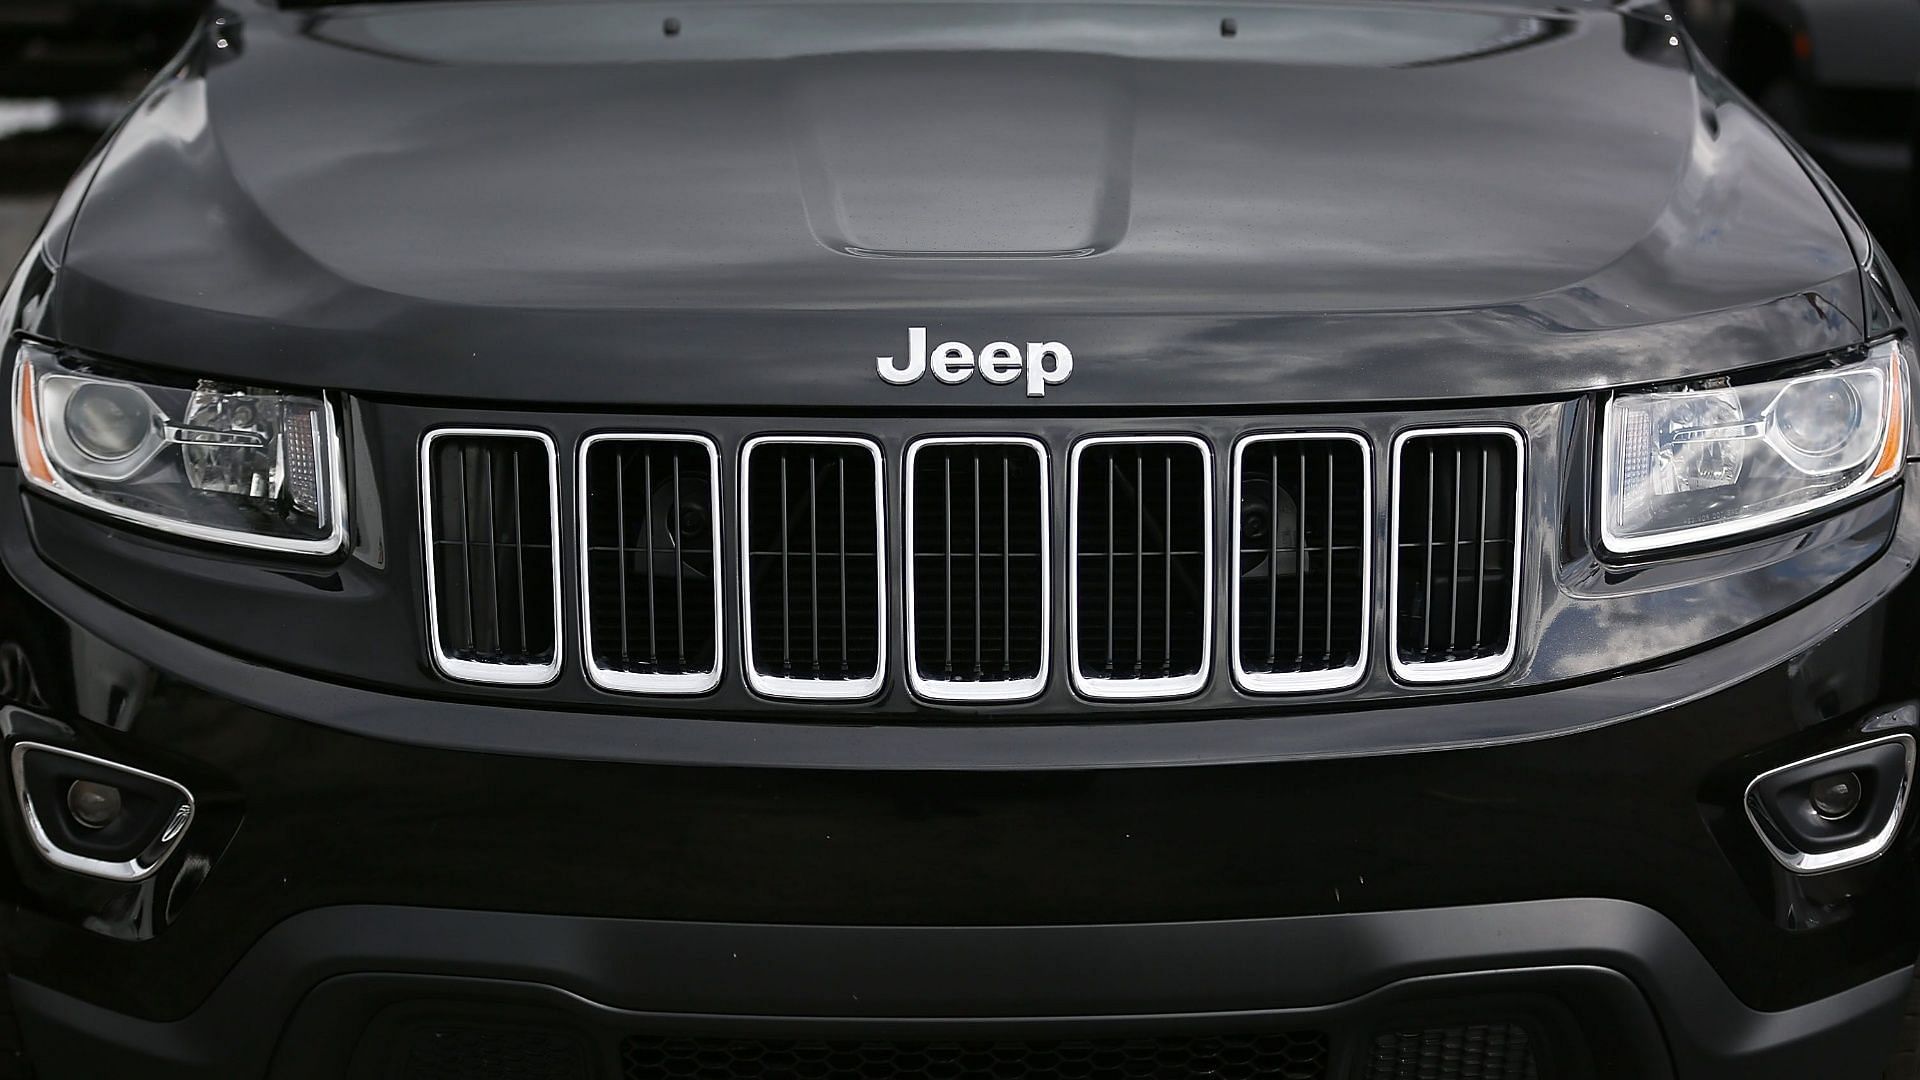 The recalled Jeep Grand Cherokee vehicles will receive a free inspection and repair through dealerships across the country (Image via Joe Raedle /Getty Images)